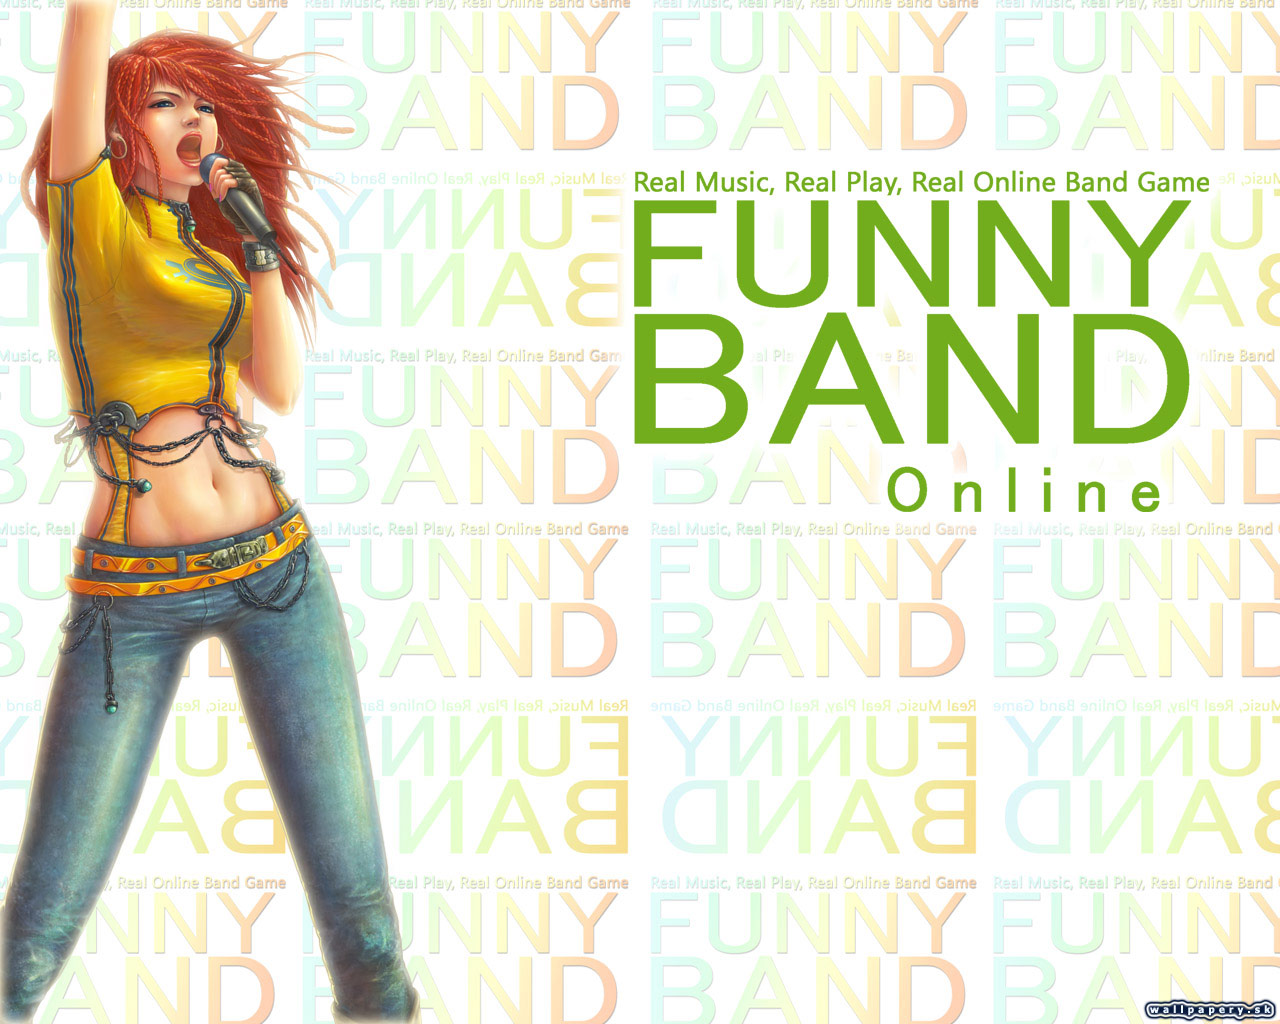 Funny Band Online - wallpaper 2